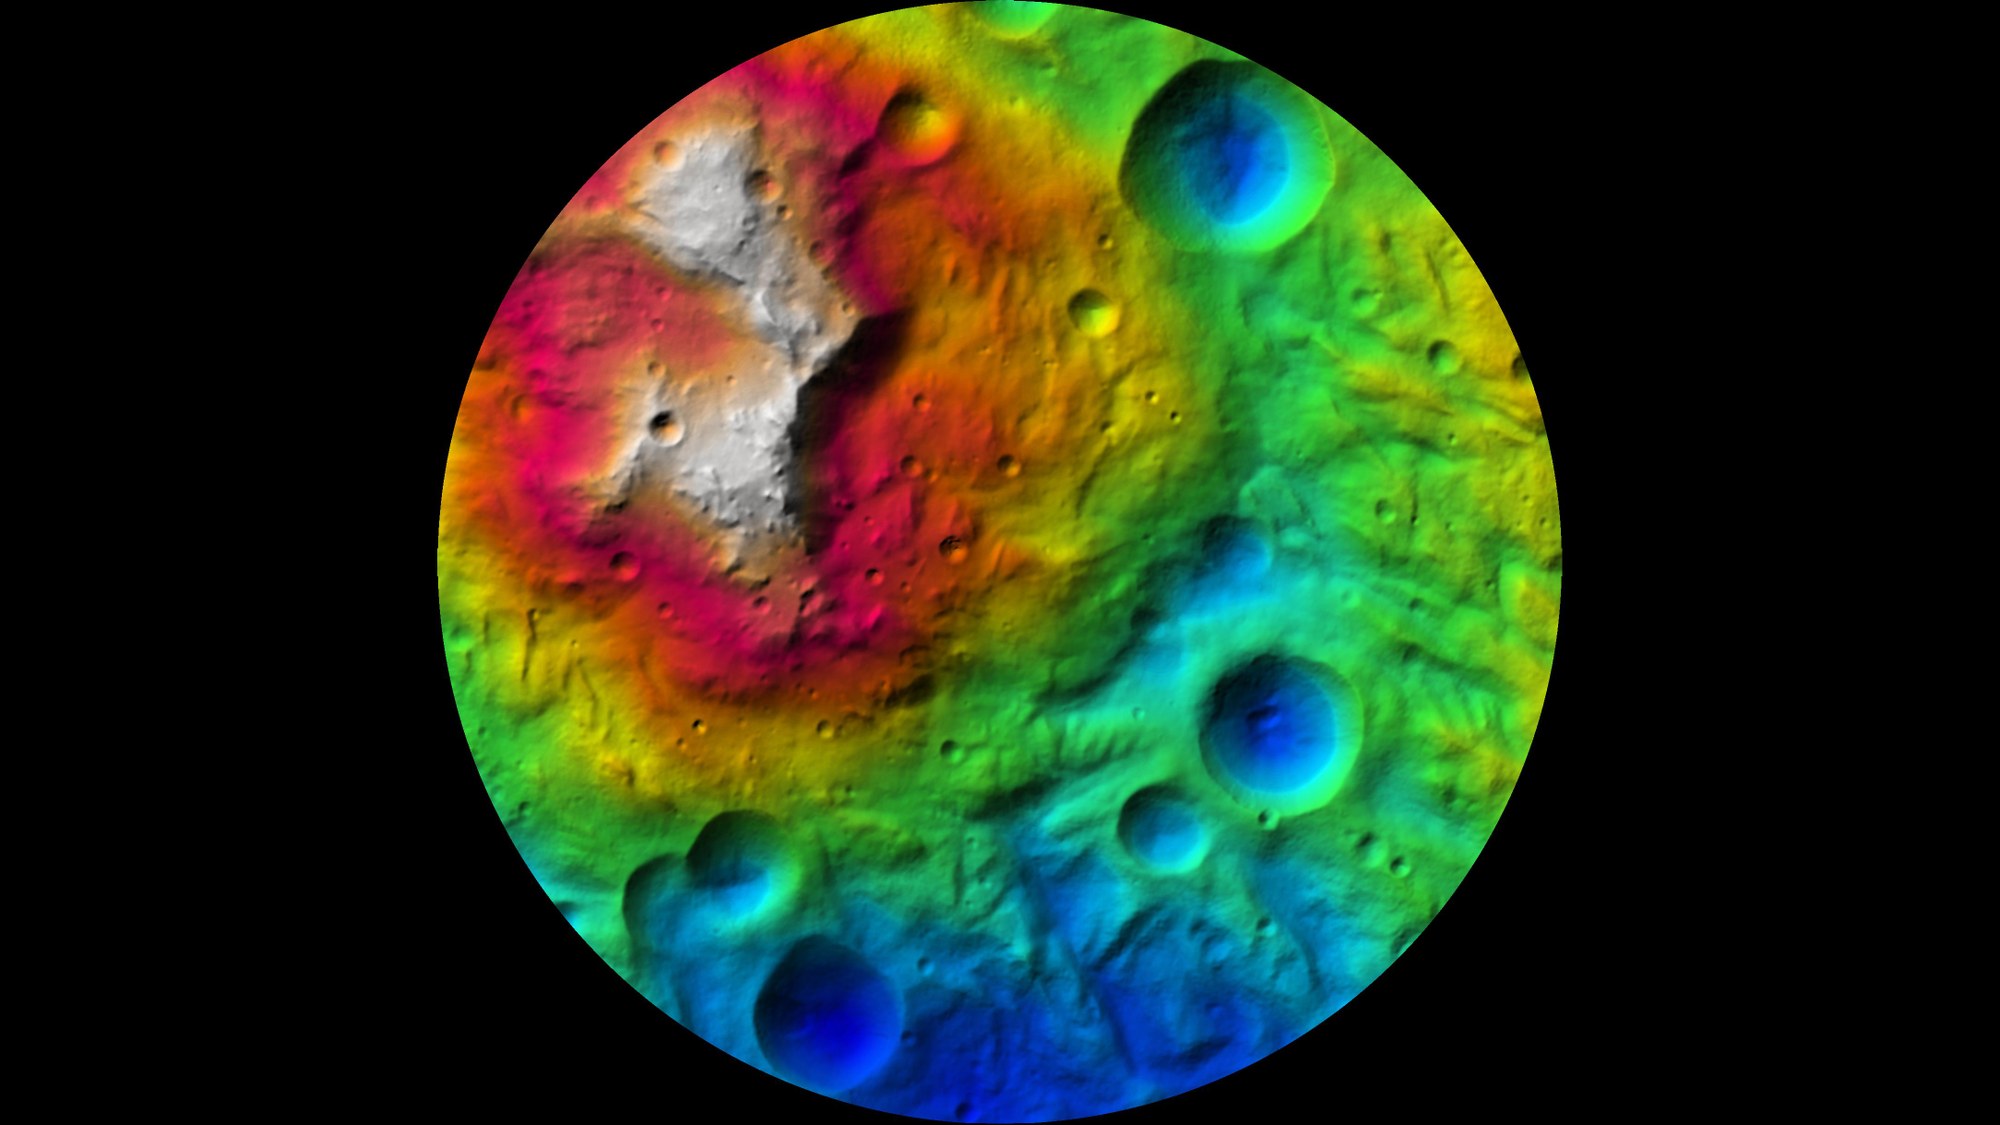 Colour-coded map of Vesta